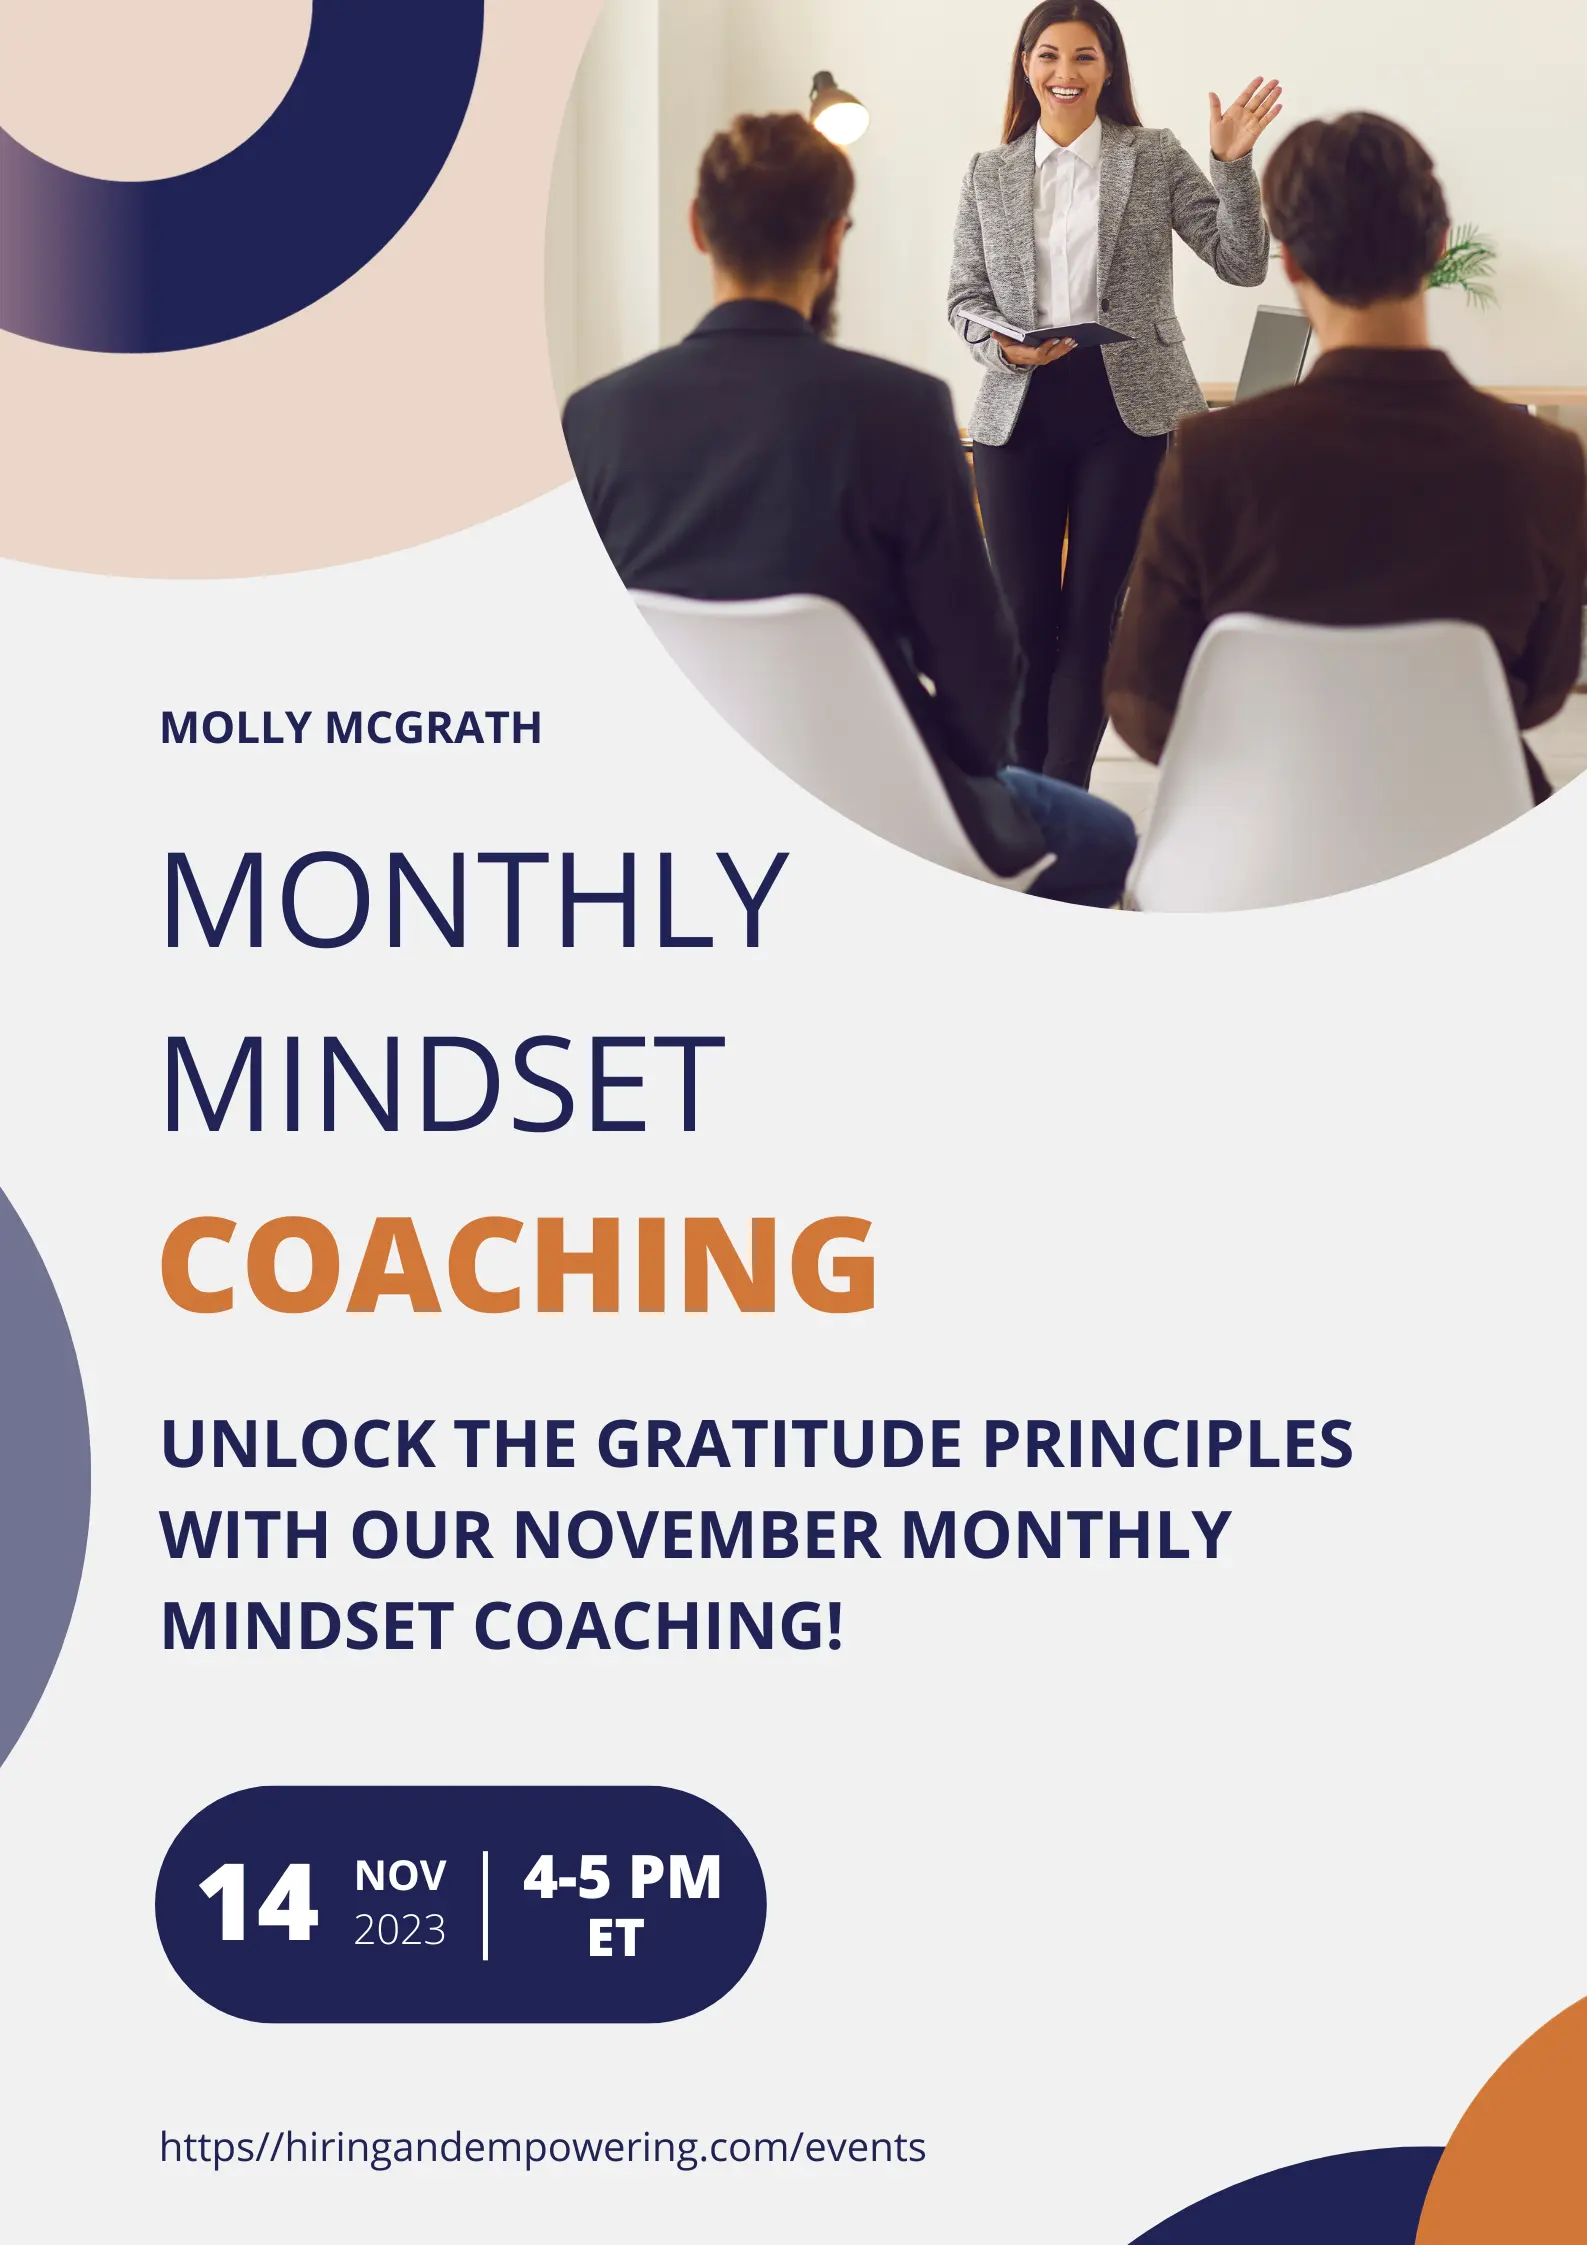 Unlock The Gratitude Principles with Our November Monthly Mindset Coaching!